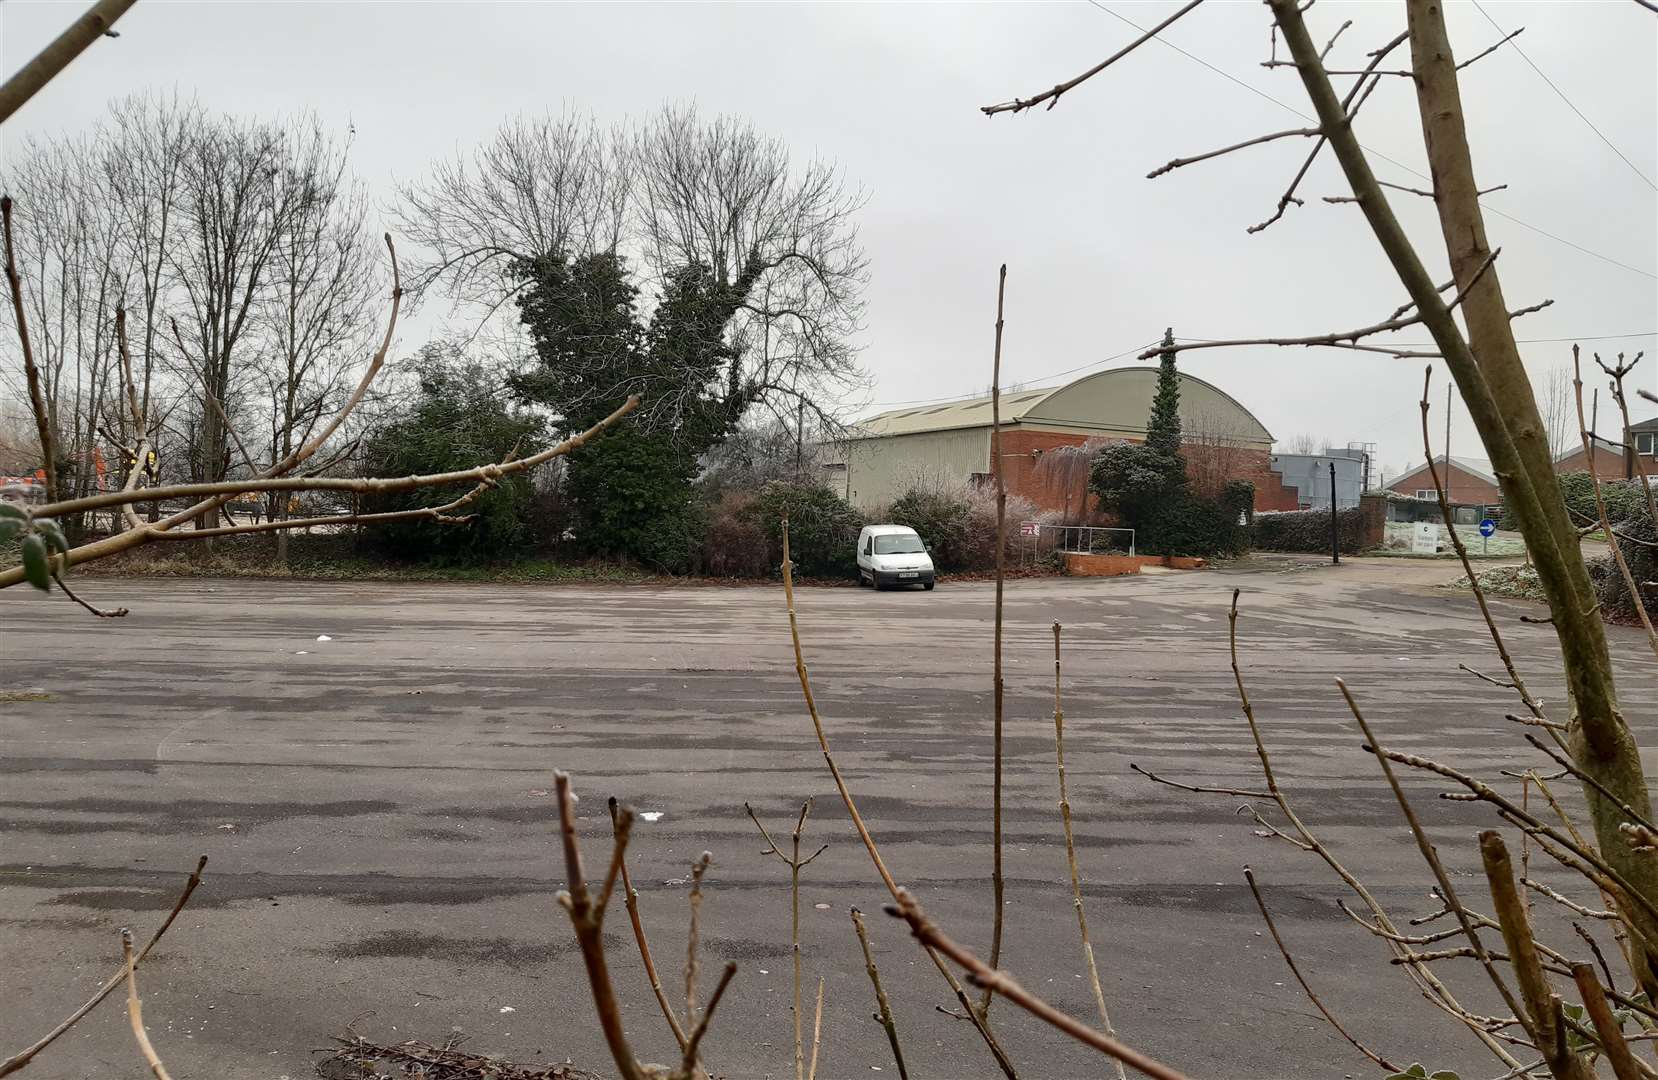 The former Headley Brothers site near Ashford town centre